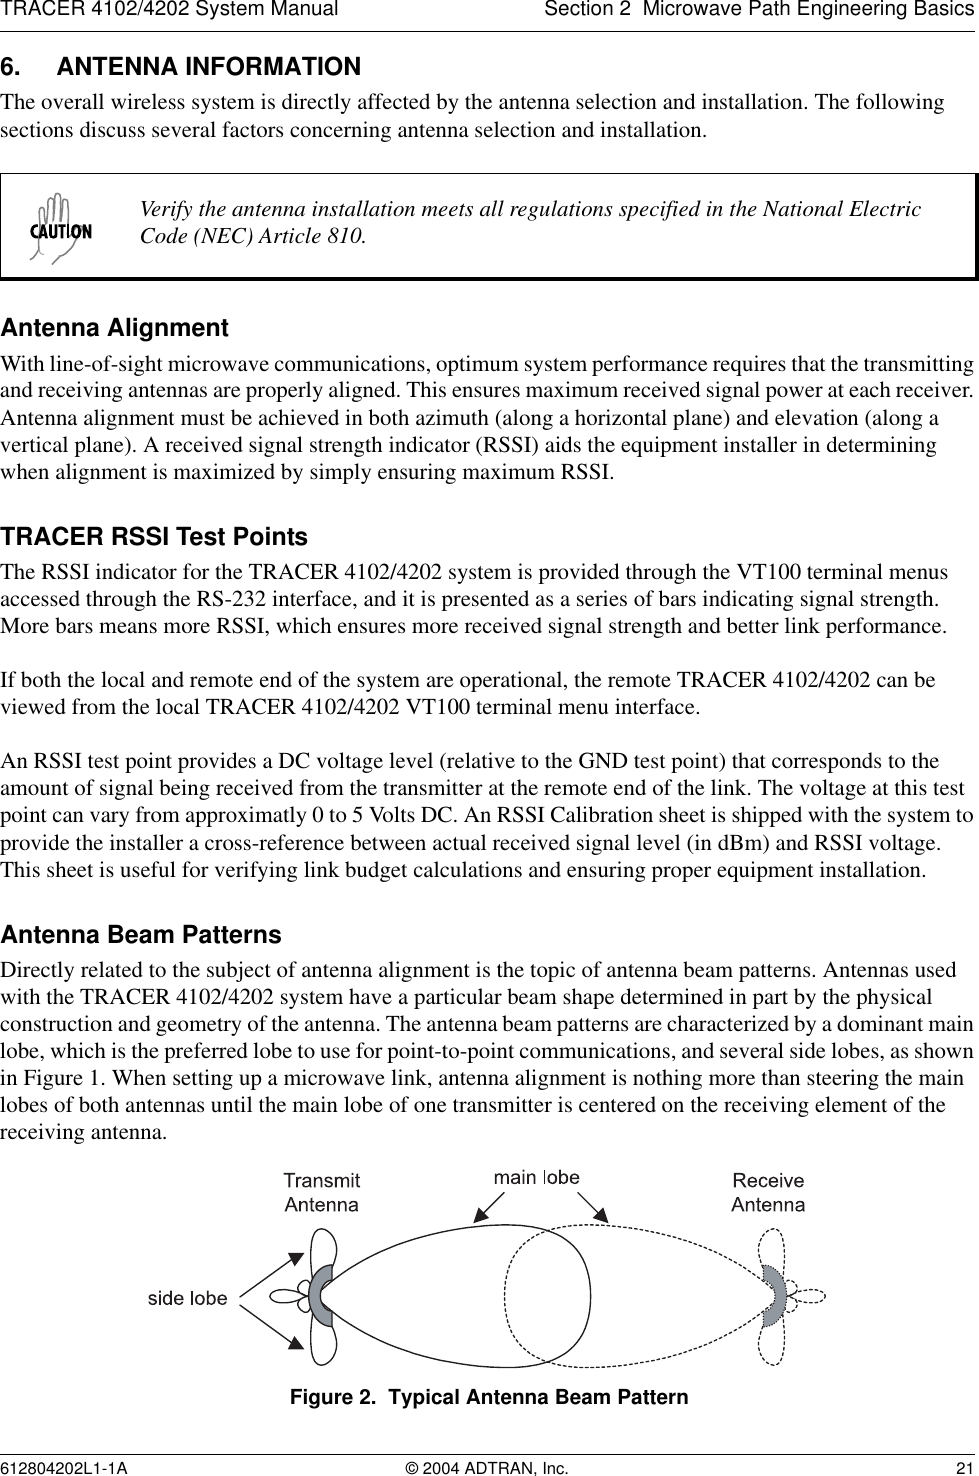 TRACER 4102/4202 System Manual Section 2  Microwave Path Engineering Basics612804202L1-1A © 2004 ADTRAN, Inc. 216. ANTENNA INFORMATIONThe overall wireless system is directly affected by the antenna selection and installation. The following sections discuss several factors concerning antenna selection and installation.Antenna AlignmentWith line-of-sight microwave communications, optimum system performance requires that the transmitting and receiving antennas are properly aligned. This ensures maximum received signal power at each receiver. Antenna alignment must be achieved in both azimuth (along a horizontal plane) and elevation (along a vertical plane). A received signal strength indicator (RSSI) aids the equipment installer in determining when alignment is maximized by simply ensuring maximum RSSI. TRACER RSSI Test PointsThe RSSI indicator for the TRACER 4102/4202 system is provided through the VT100 terminal menus accessed through the RS-232 interface, and it is presented as a series of bars indicating signal strength. More bars means more RSSI, which ensures more received signal strength and better link performance.If both the local and remote end of the system are operational, the remote TRACER 4102/4202 can be viewed from the local TRACER 4102/4202 VT100 terminal menu interface.An RSSI test point provides a DC voltage level (relative to the GND test point) that corresponds to the amount of signal being received from the transmitter at the remote end of the link. The voltage at this test point can vary from approximatly 0 to 5 Volts DC. An RSSI Calibration sheet is shipped with the system to provide the installer a cross-reference between actual received signal level (in dBm) and RSSI voltage. This sheet is useful for verifying link budget calculations and ensuring proper equipment installation.Antenna Beam PatternsDirectly related to the subject of antenna alignment is the topic of antenna beam patterns. Antennas used with the TRACER 4102/4202 system have a particular beam shape determined in part by the physical construction and geometry of the antenna. The antenna beam patterns are characterized by a dominant main lobe, which is the preferred lobe to use for point-to-point communications, and several side lobes, as shown in Figure 1. When setting up a microwave link, antenna alignment is nothing more than steering the main lobes of both antennas until the main lobe of one transmitter is centered on the receiving element of the receiving antenna.Figure 2.  Typical Antenna Beam PatternVerify the antenna installation meets all regulations specified in the National Electric Code (NEC) Article 810.